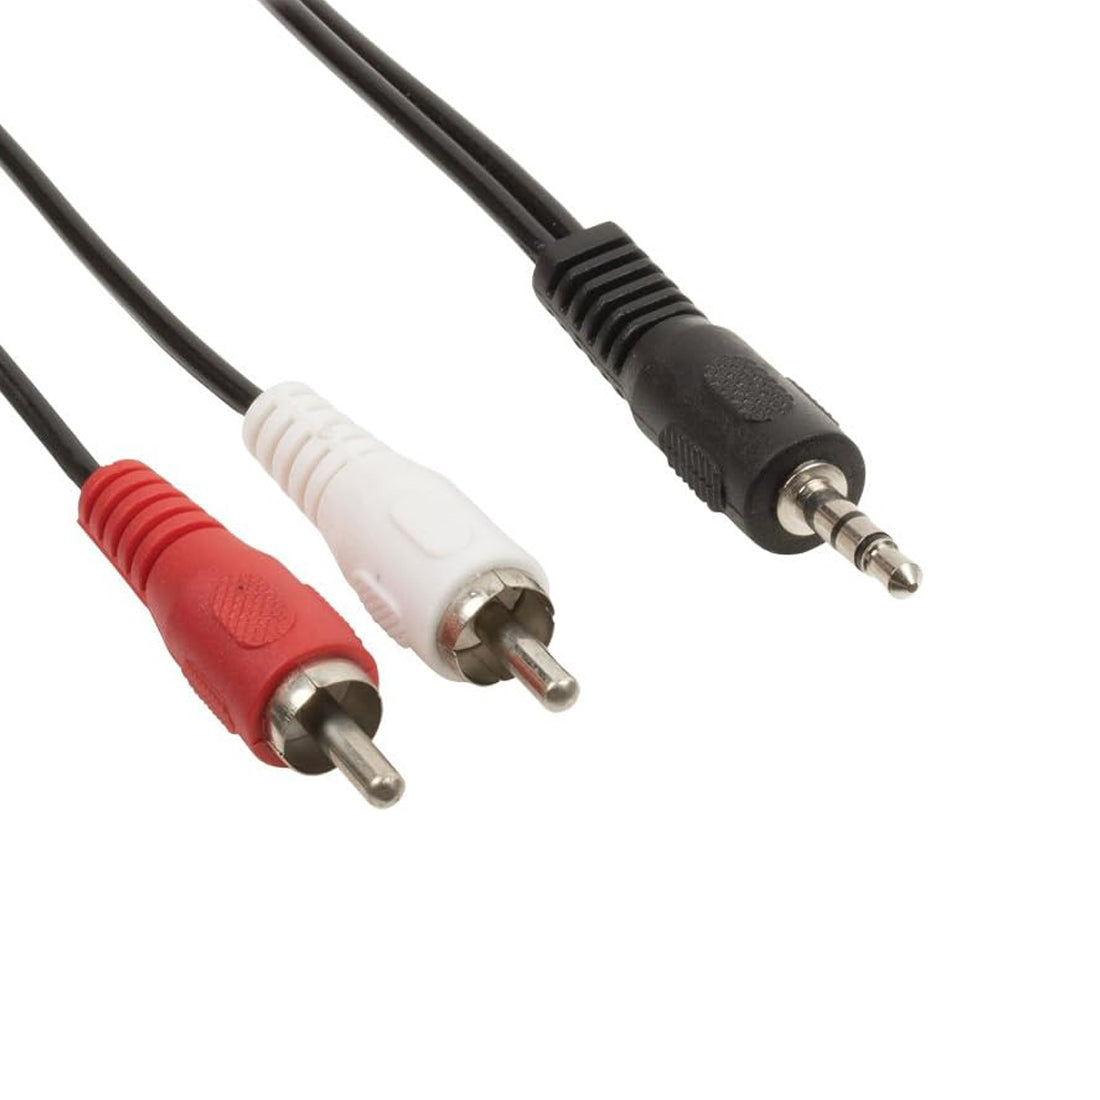 Valueline Stereo audio cable with 3.5 mm Jasck connector and 2 RCA connectors, 5 meters